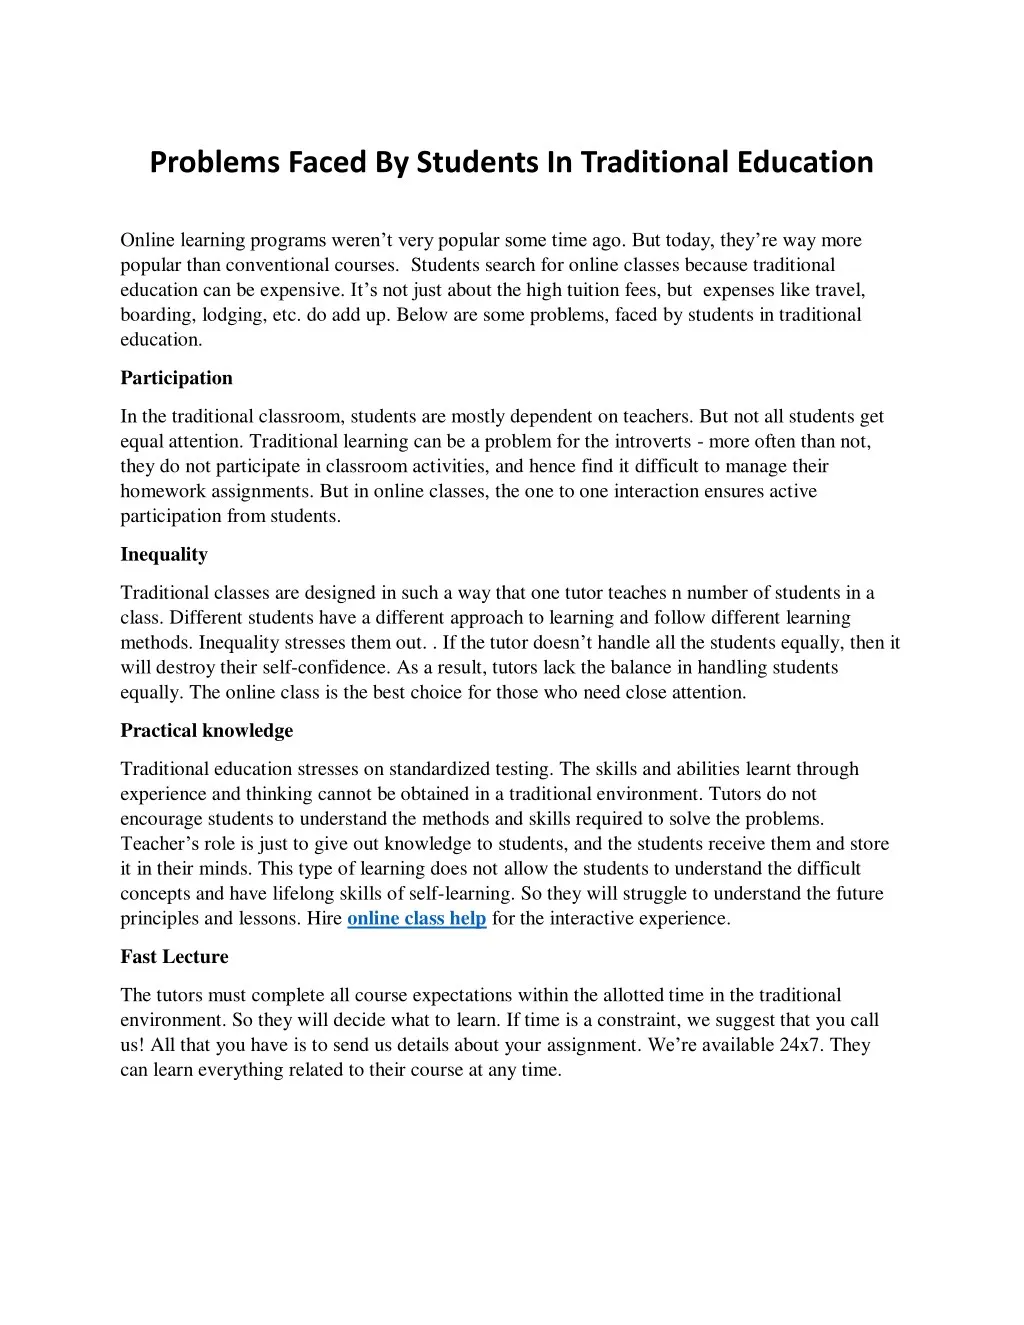 problems faced by students in traditional